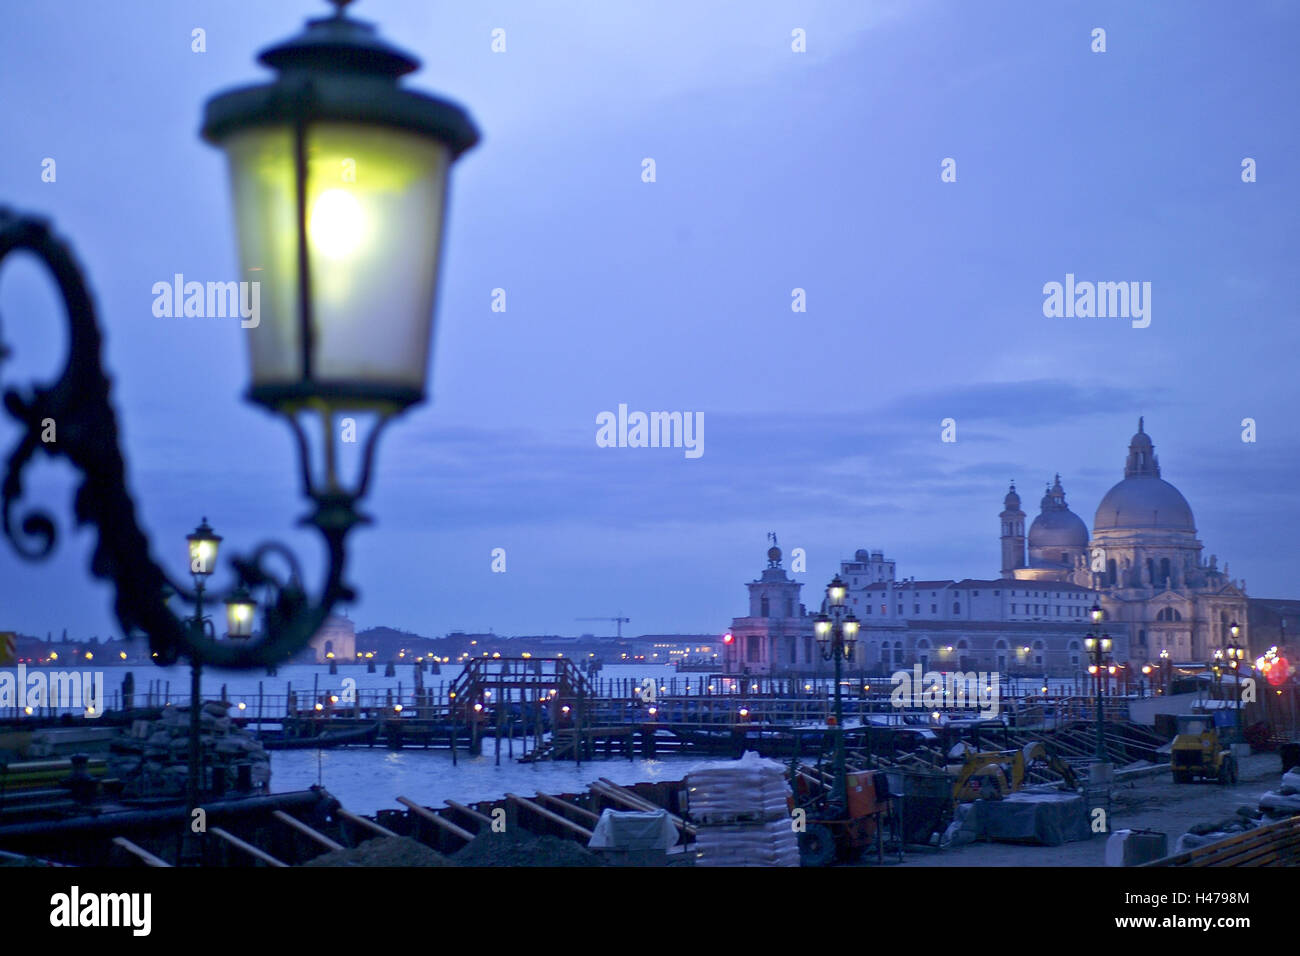 Italy, Venice, Markus's cathedral, dusk, lanterns, lighting, lantern light, channel, bridges, Europe, waters, places interest, sea, famous, vacation, tourism, outsides, outside, travels, romantically, town, architecture, pile, landing stage, boat investor Stock Photo